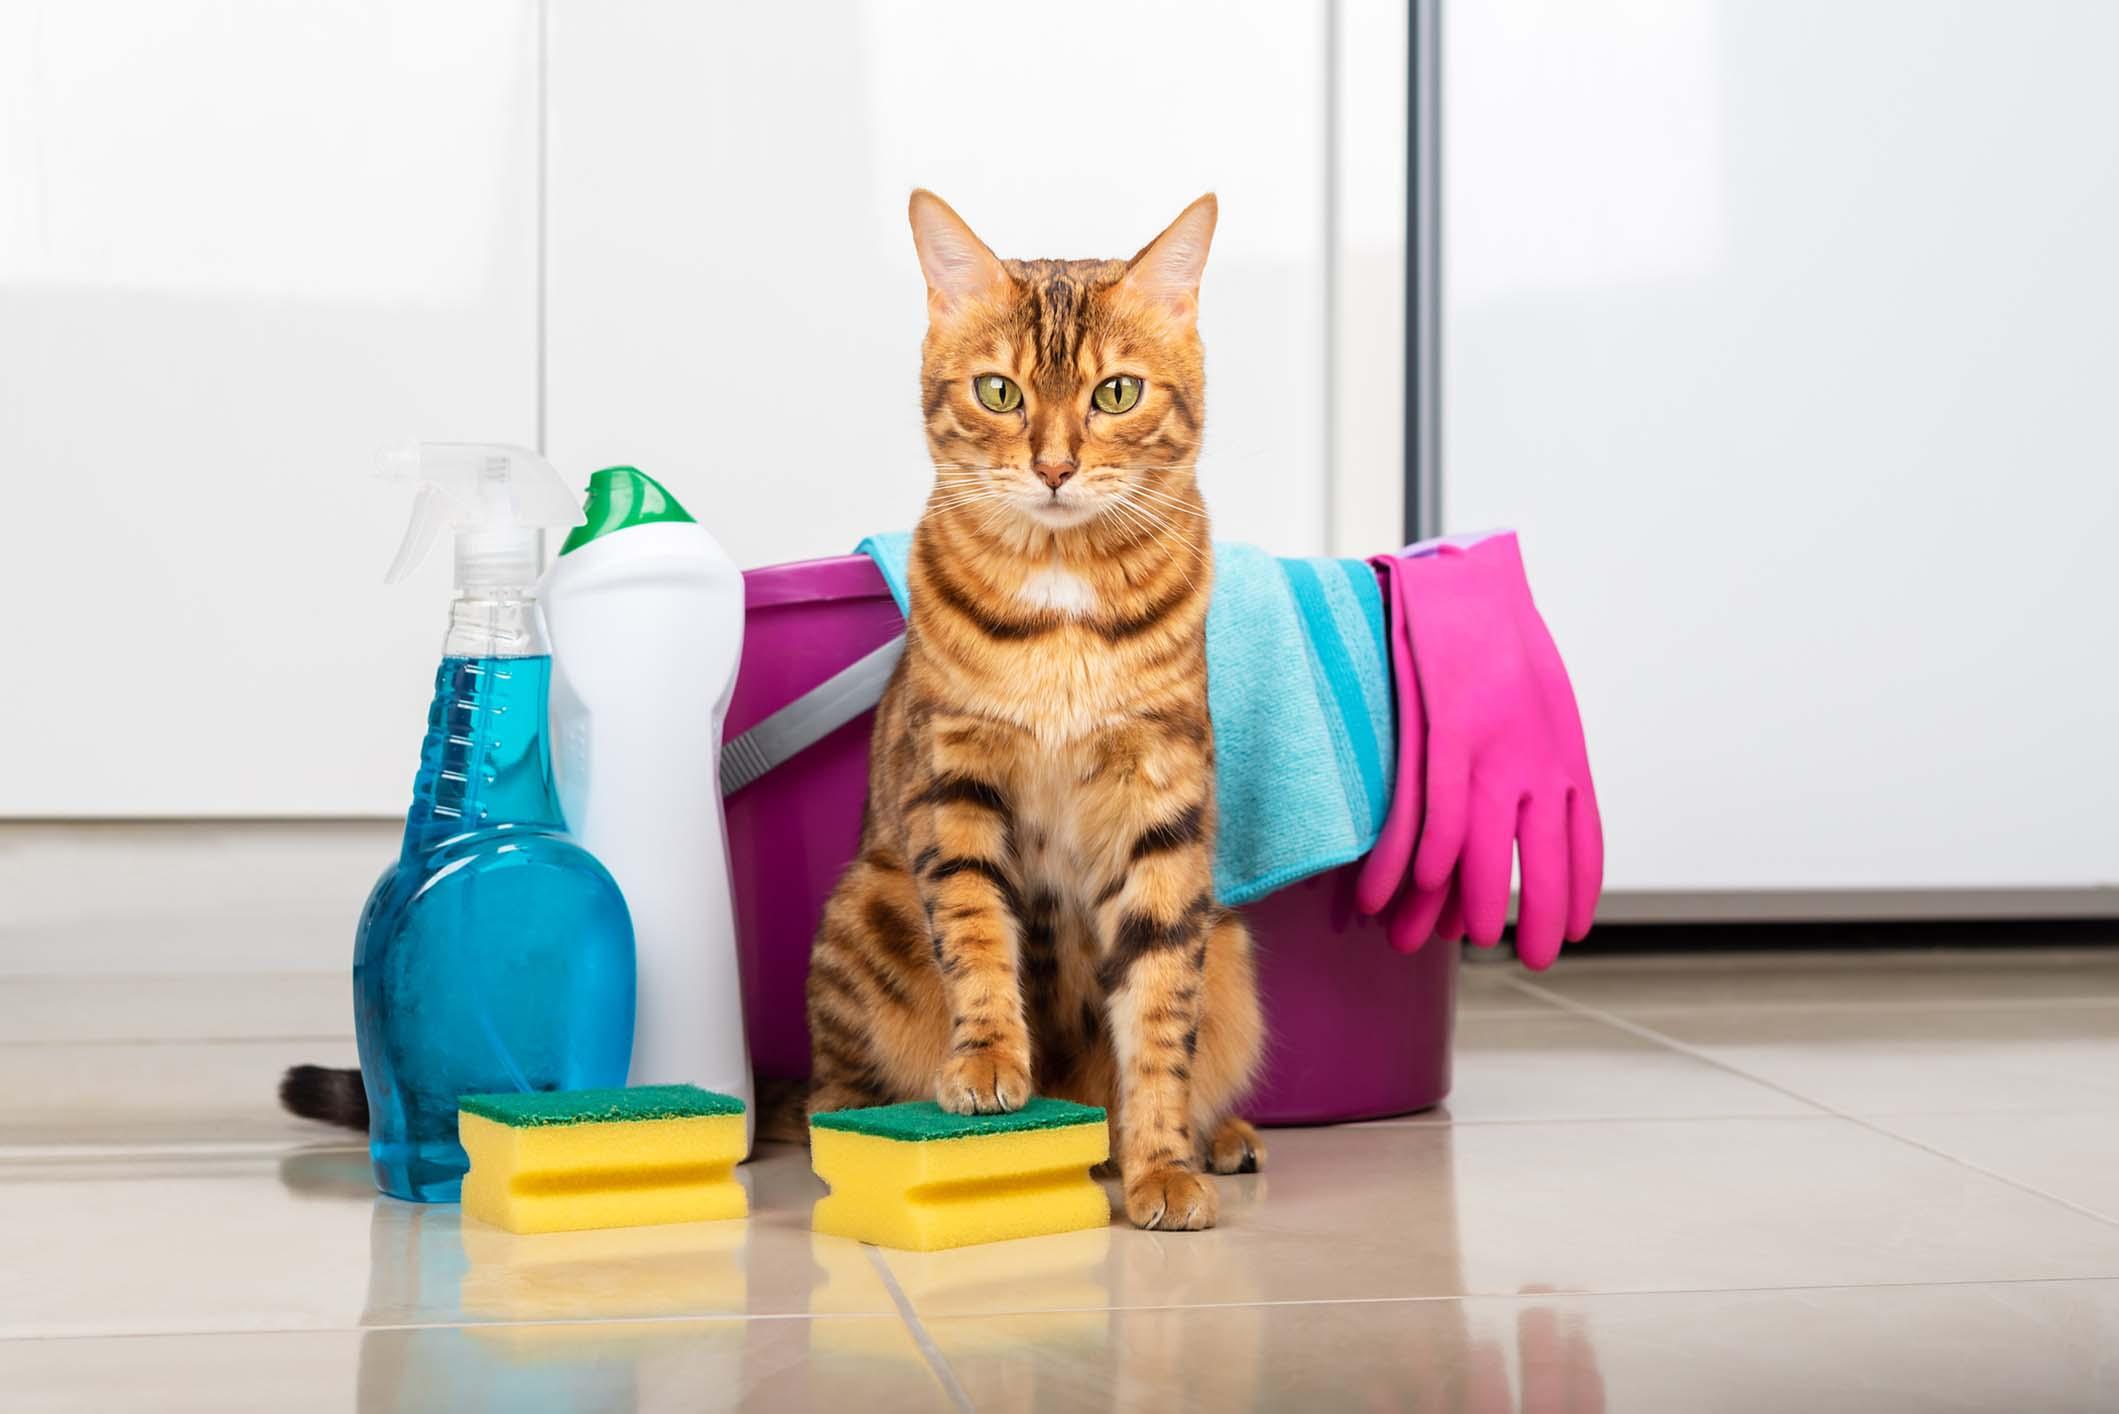 Bengal cat sitting next to cleaning supplies